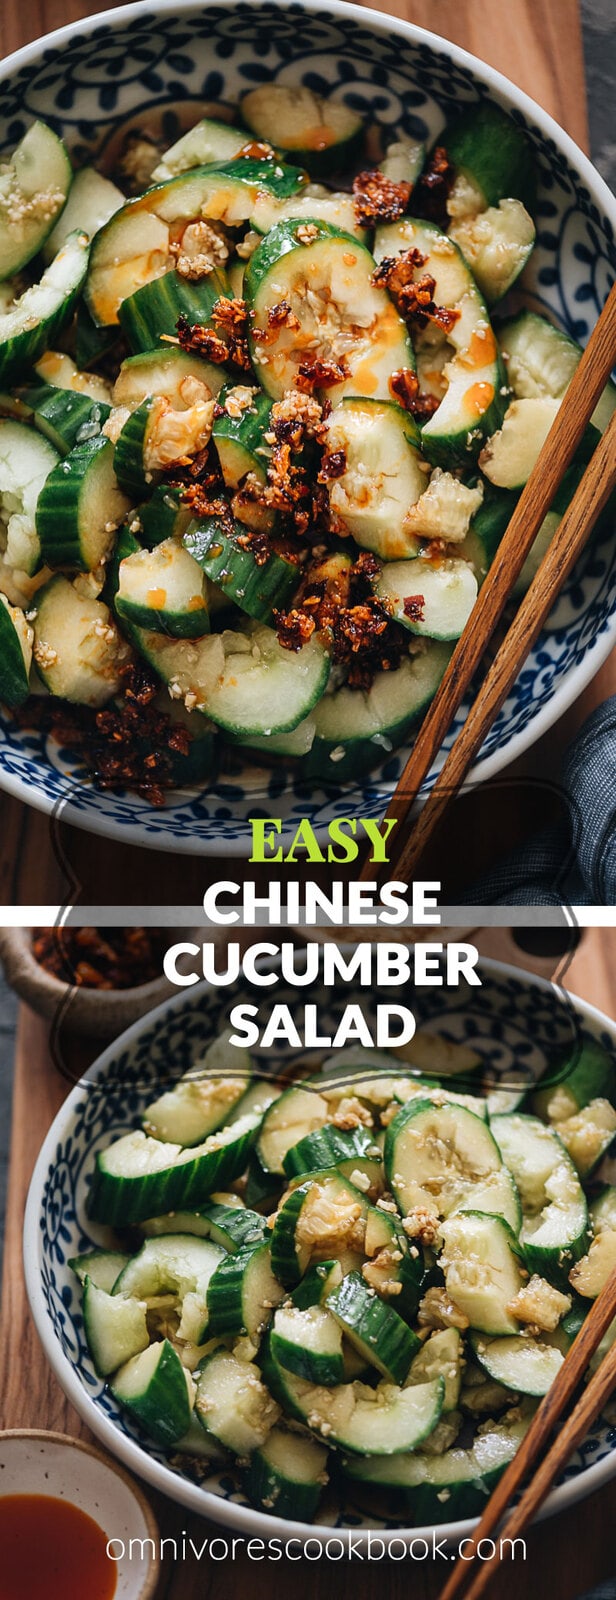 Chinese Cucumber Salad (拍黄瓜, pai huang gua) is a light and refreshing appetizer. The crisp cucumber is mixed with plenty of garlic, drizzled with an appetizing blend of soy sauce, vinegar and sugar, then finished with a few drops of sesame oil.